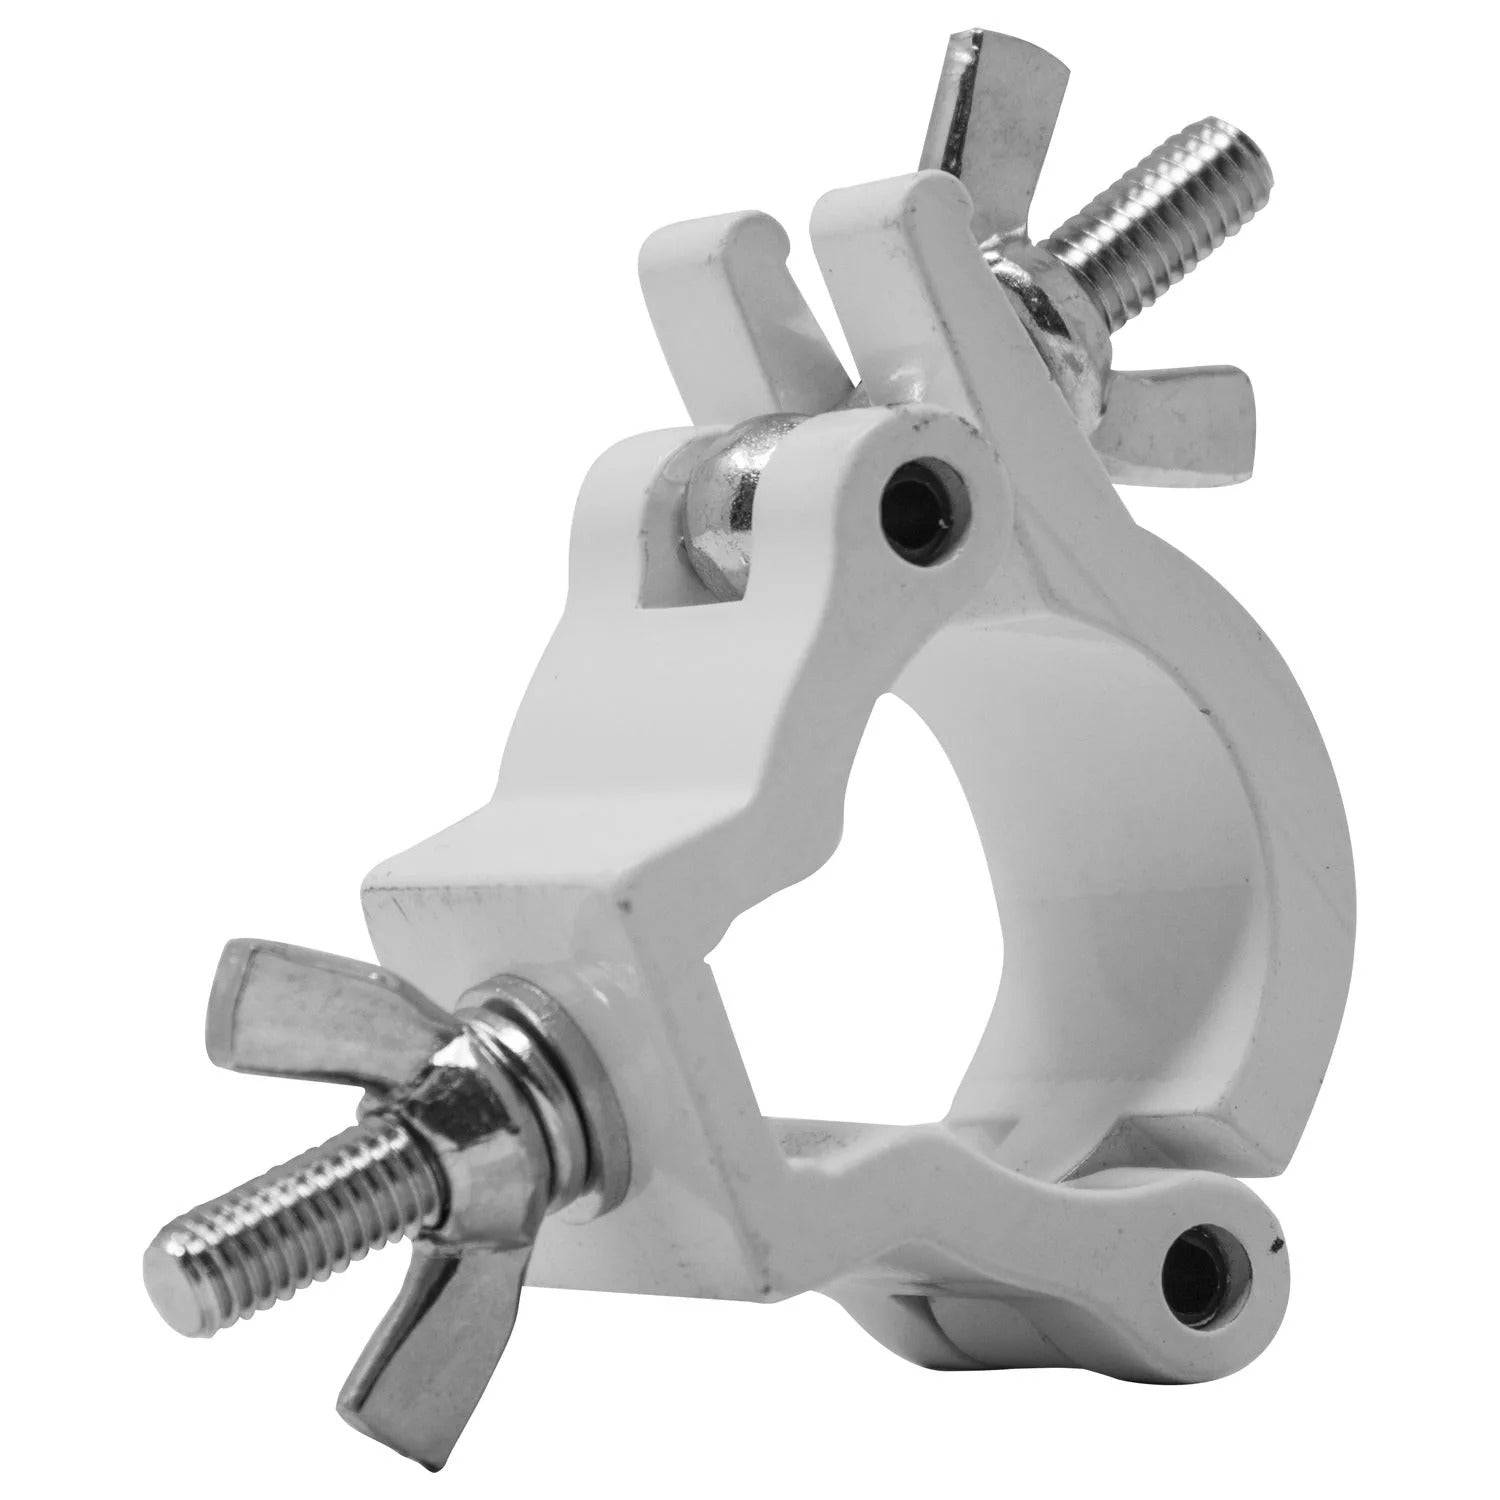 Odyssey LAC25SW, Aluminum Small Mini Clamp With A Hex Bolt And Wing Nut White Finish - Hollywood DJ